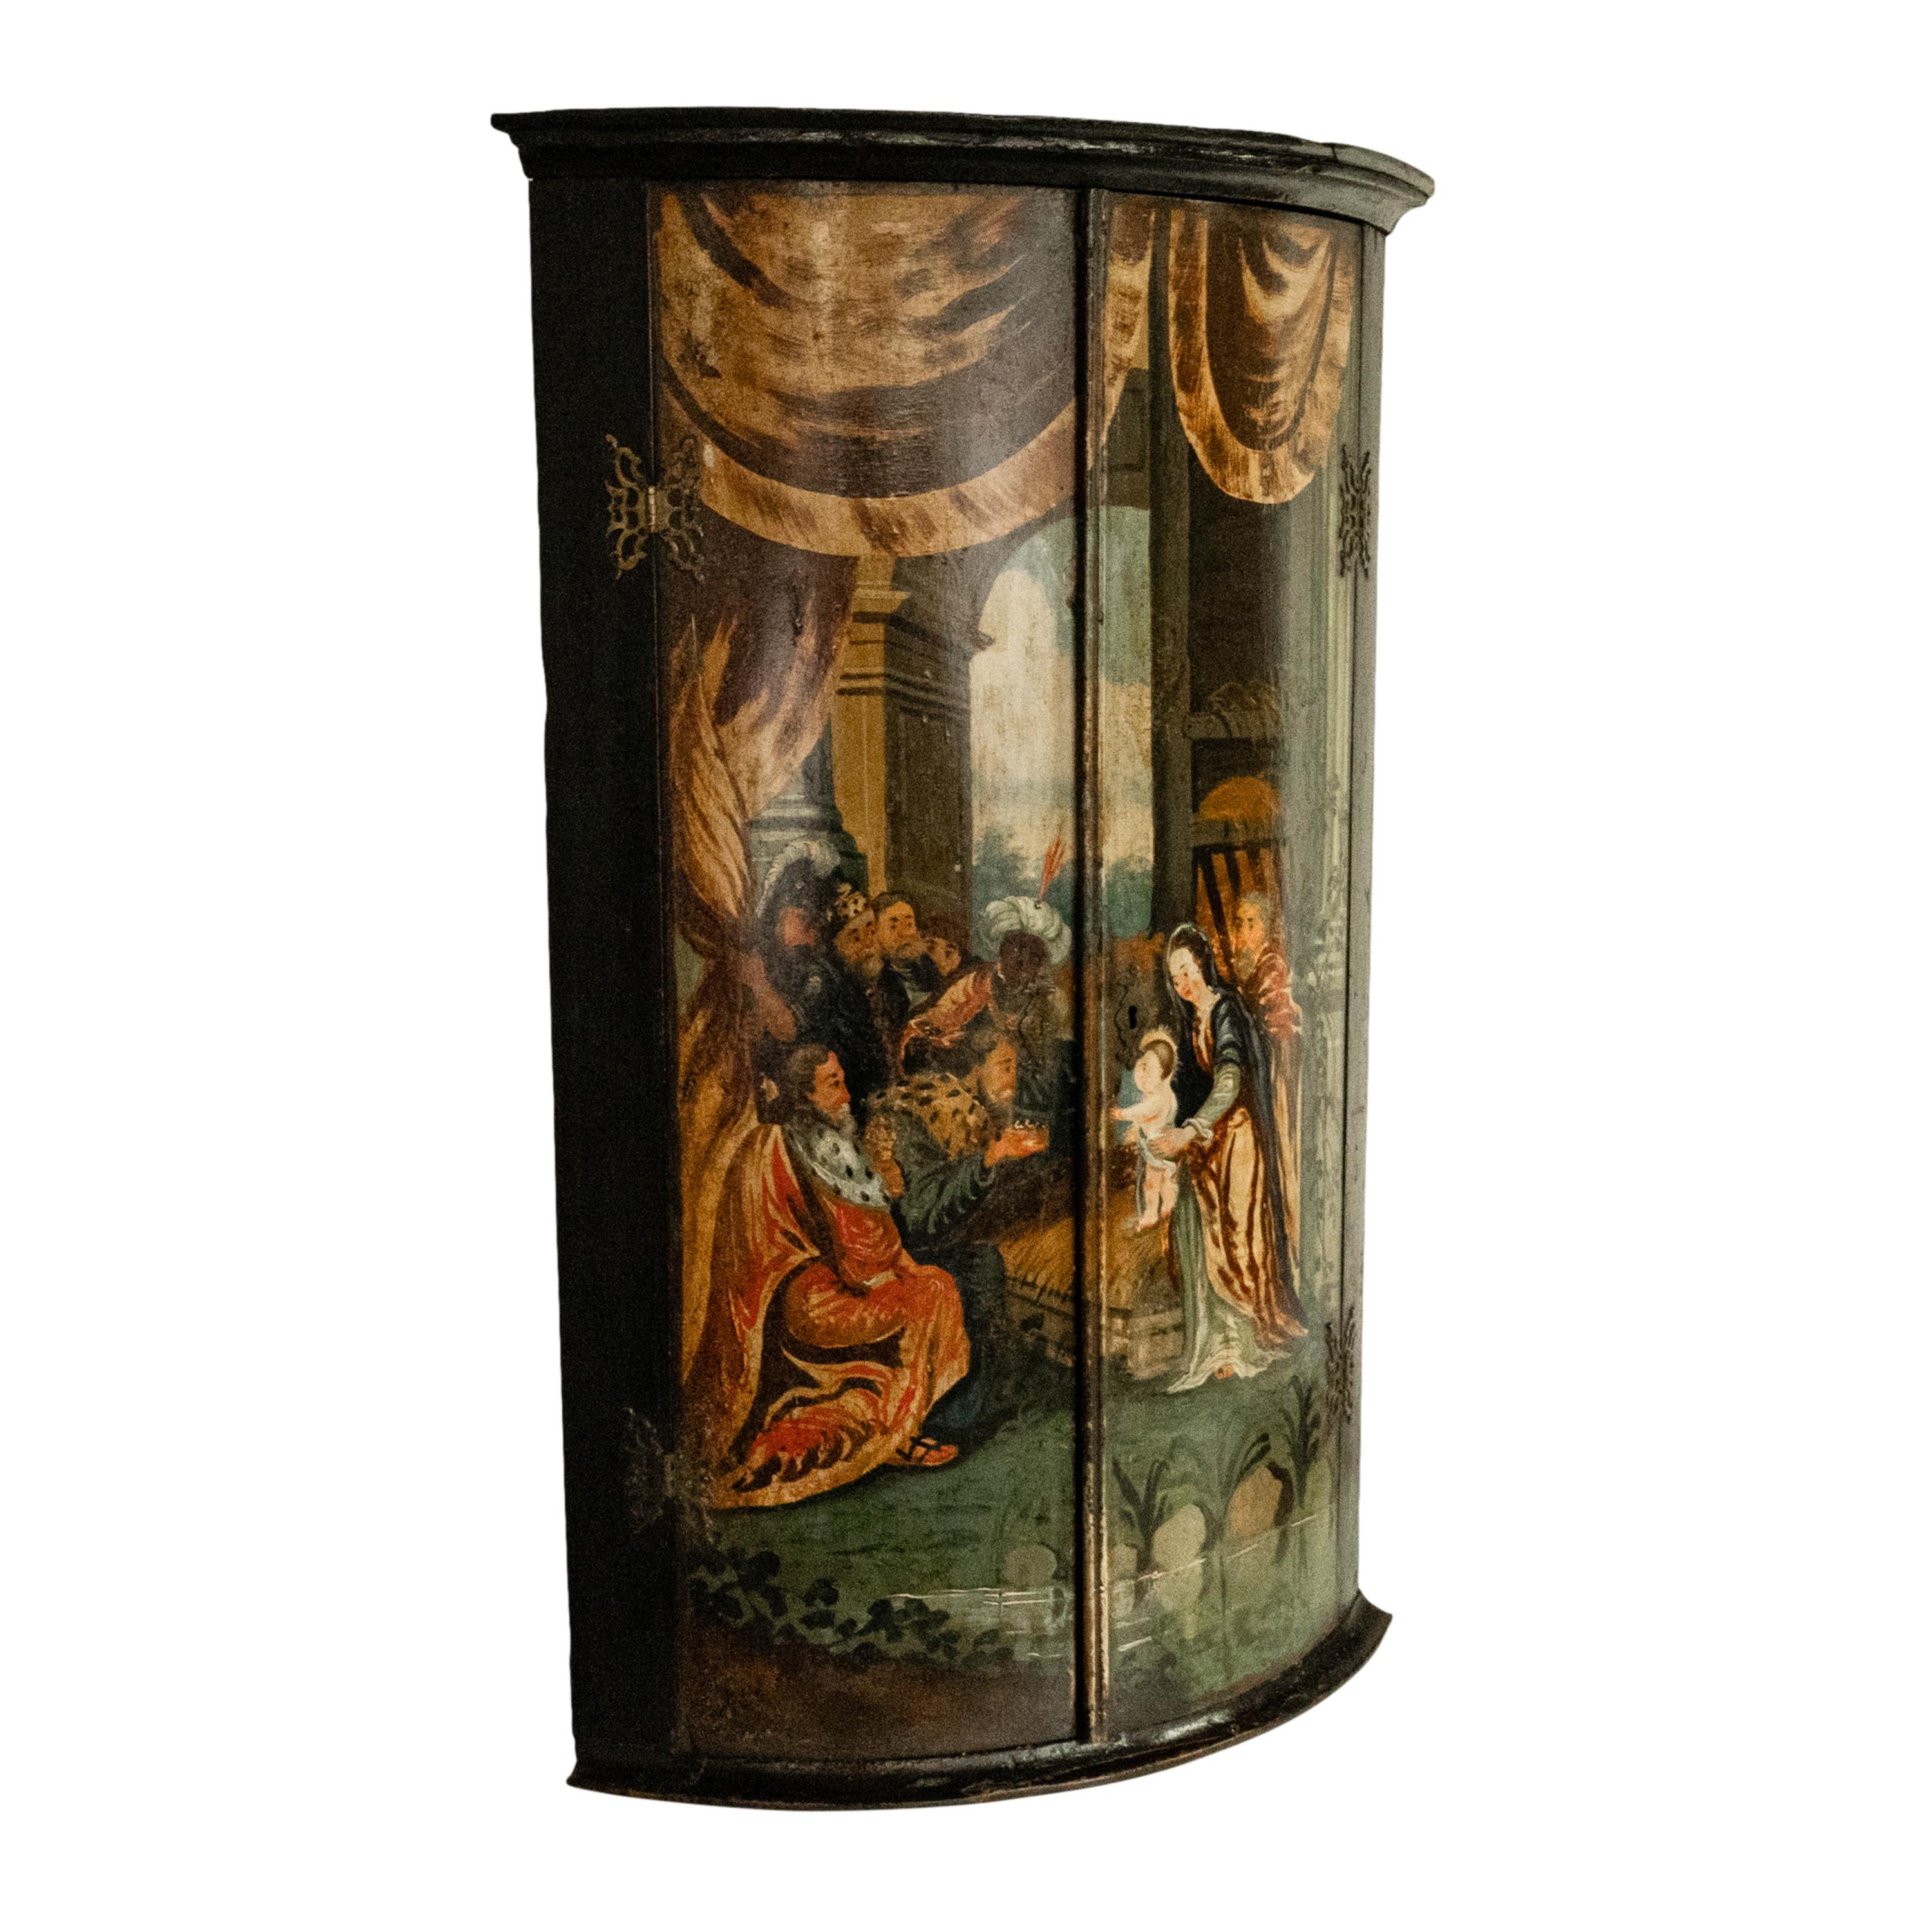 A rare antique Flemish/Dutch polychrome corner cabinet, painted with the nativity scene of Jesus, Holland circa 1760.
The two door bow-fronted cabinet having an original painting of the Adoration of the Christ Child